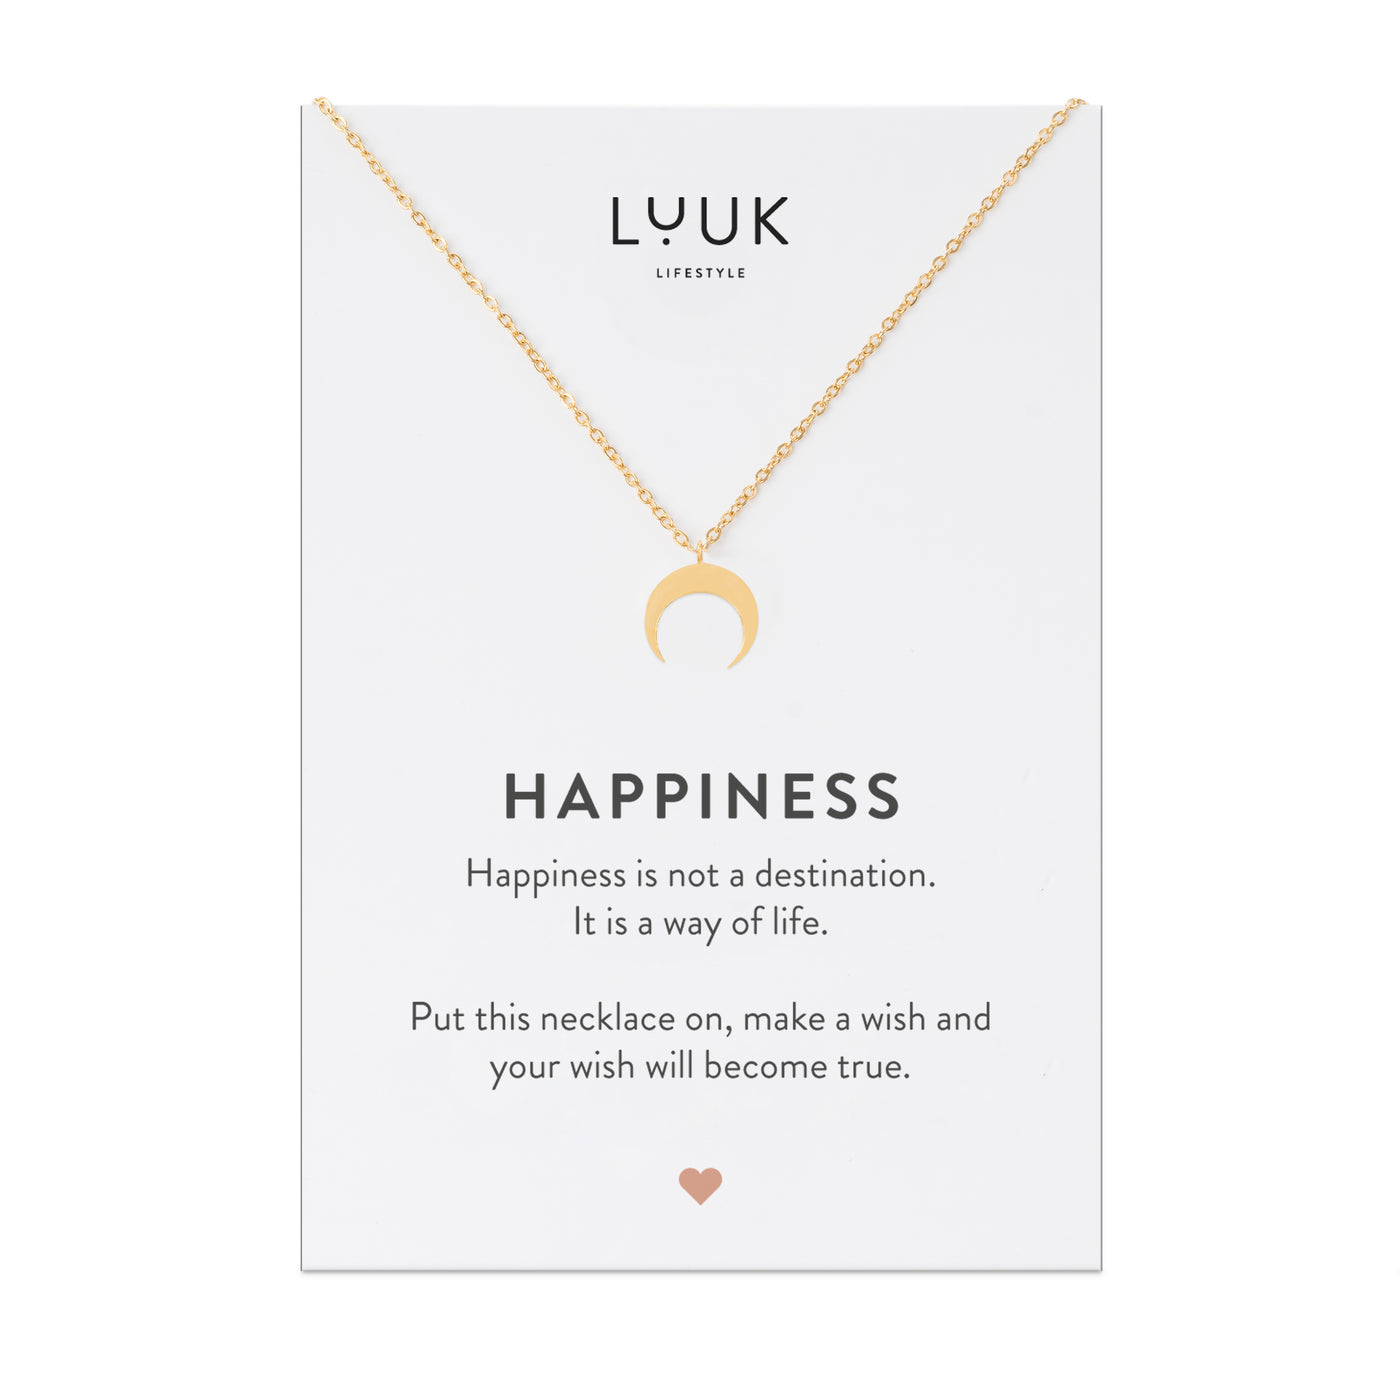 Necklace with moon pendant and Happiness greeting card